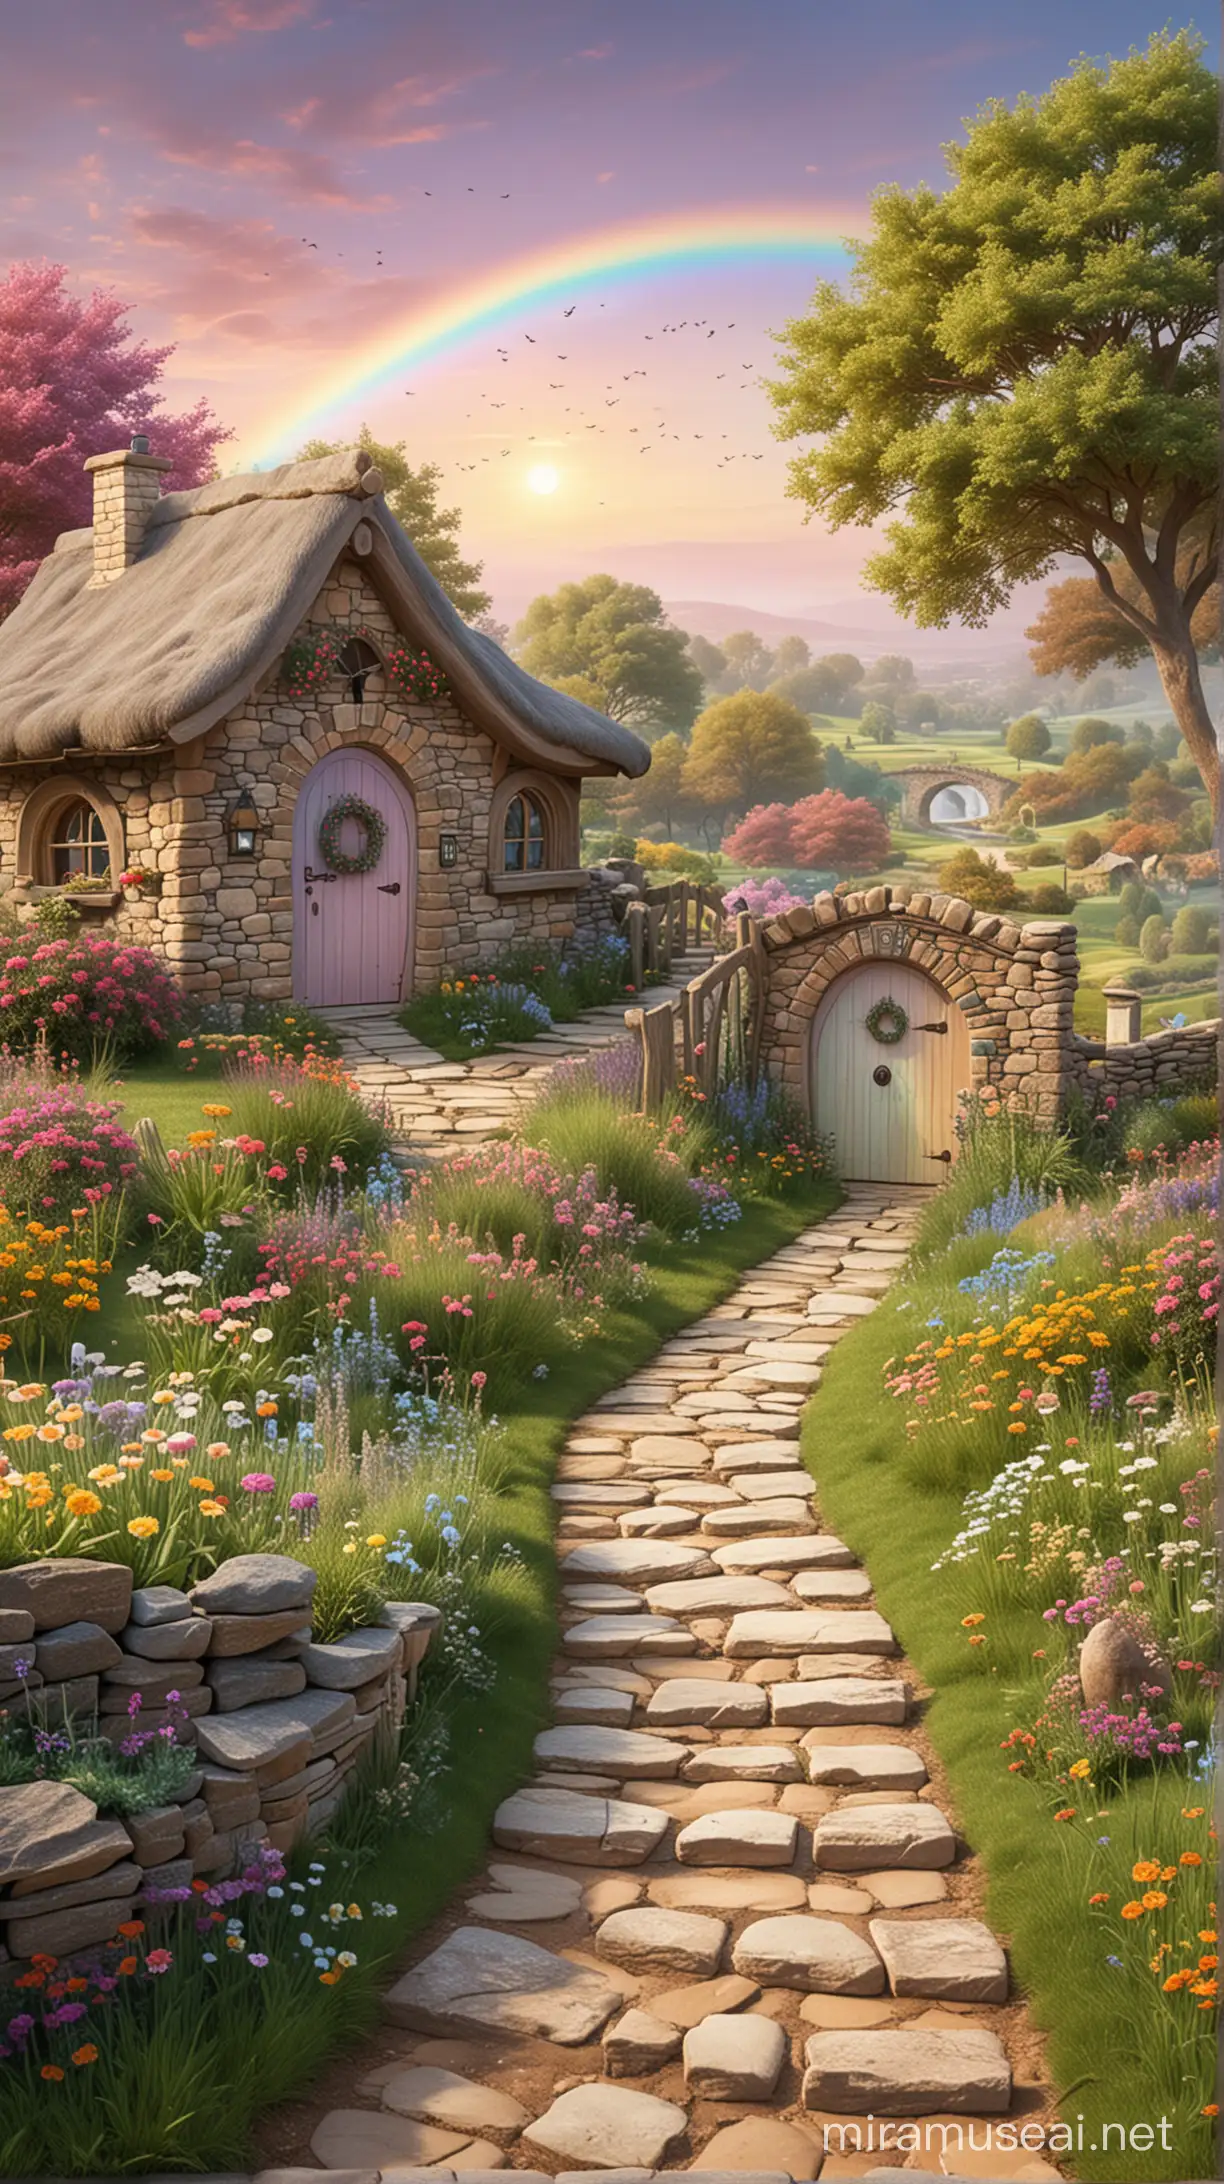 Enchanting Pastel Rainbow Landscape with Fairy Doors and Cottages